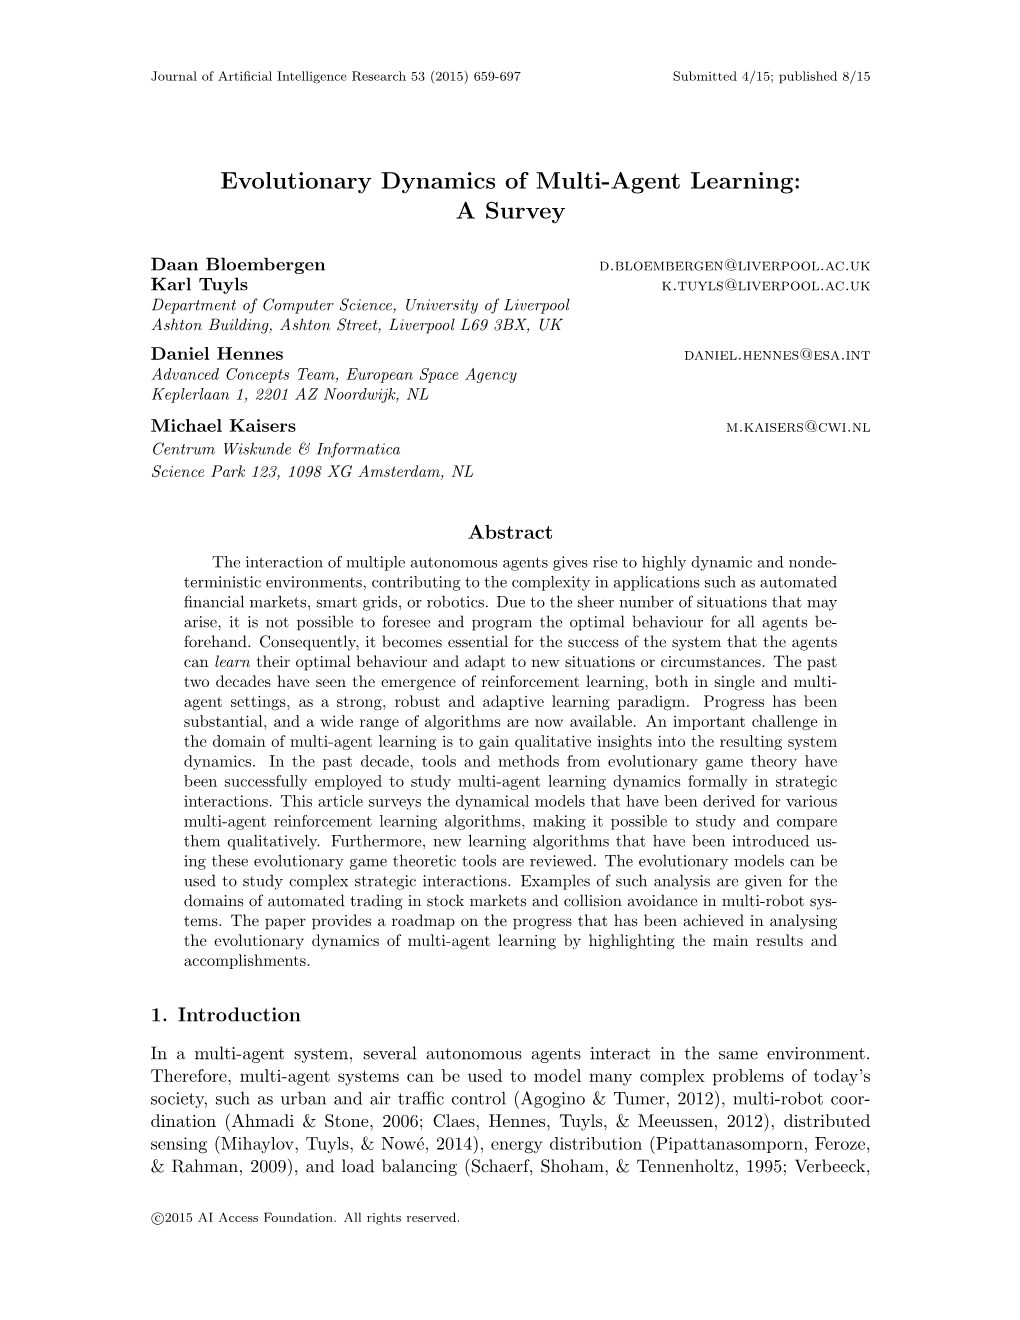 Evolutionary Dynamics of Multi-Agent Learning: a Survey